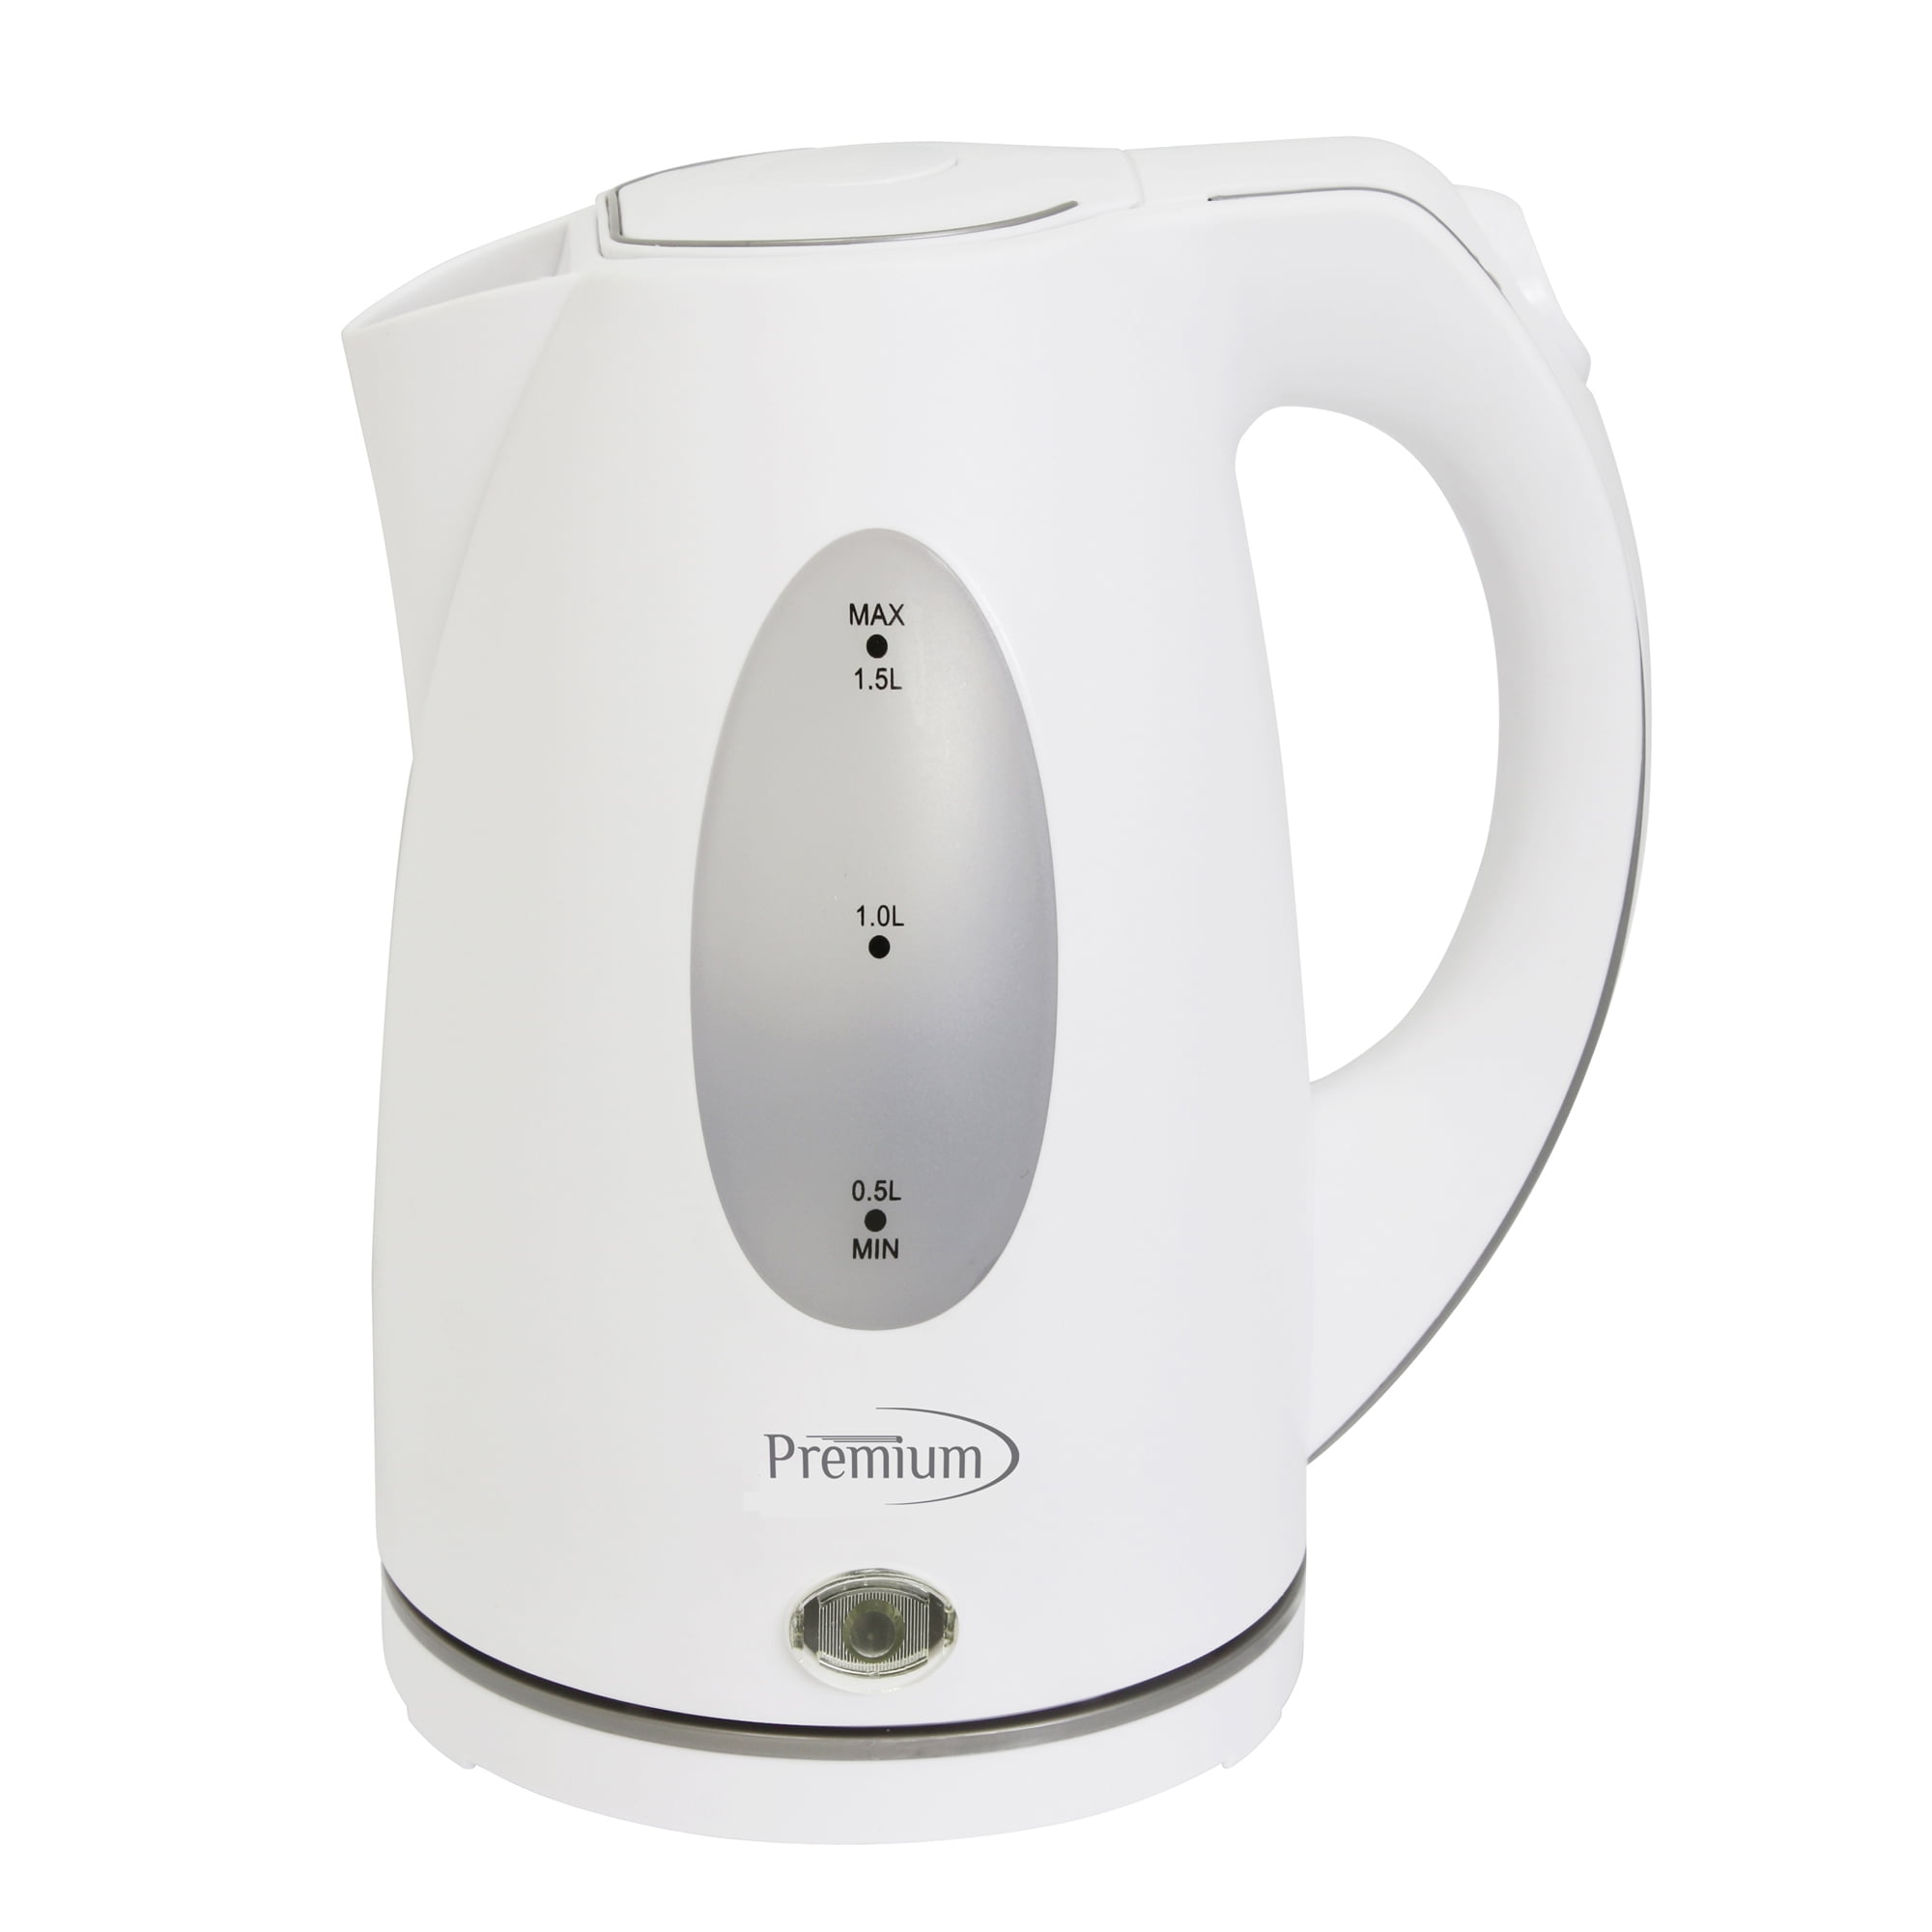 Precision Trading Ptk5156 Stainless Steel Electric Tea Kettle, Black & Silver